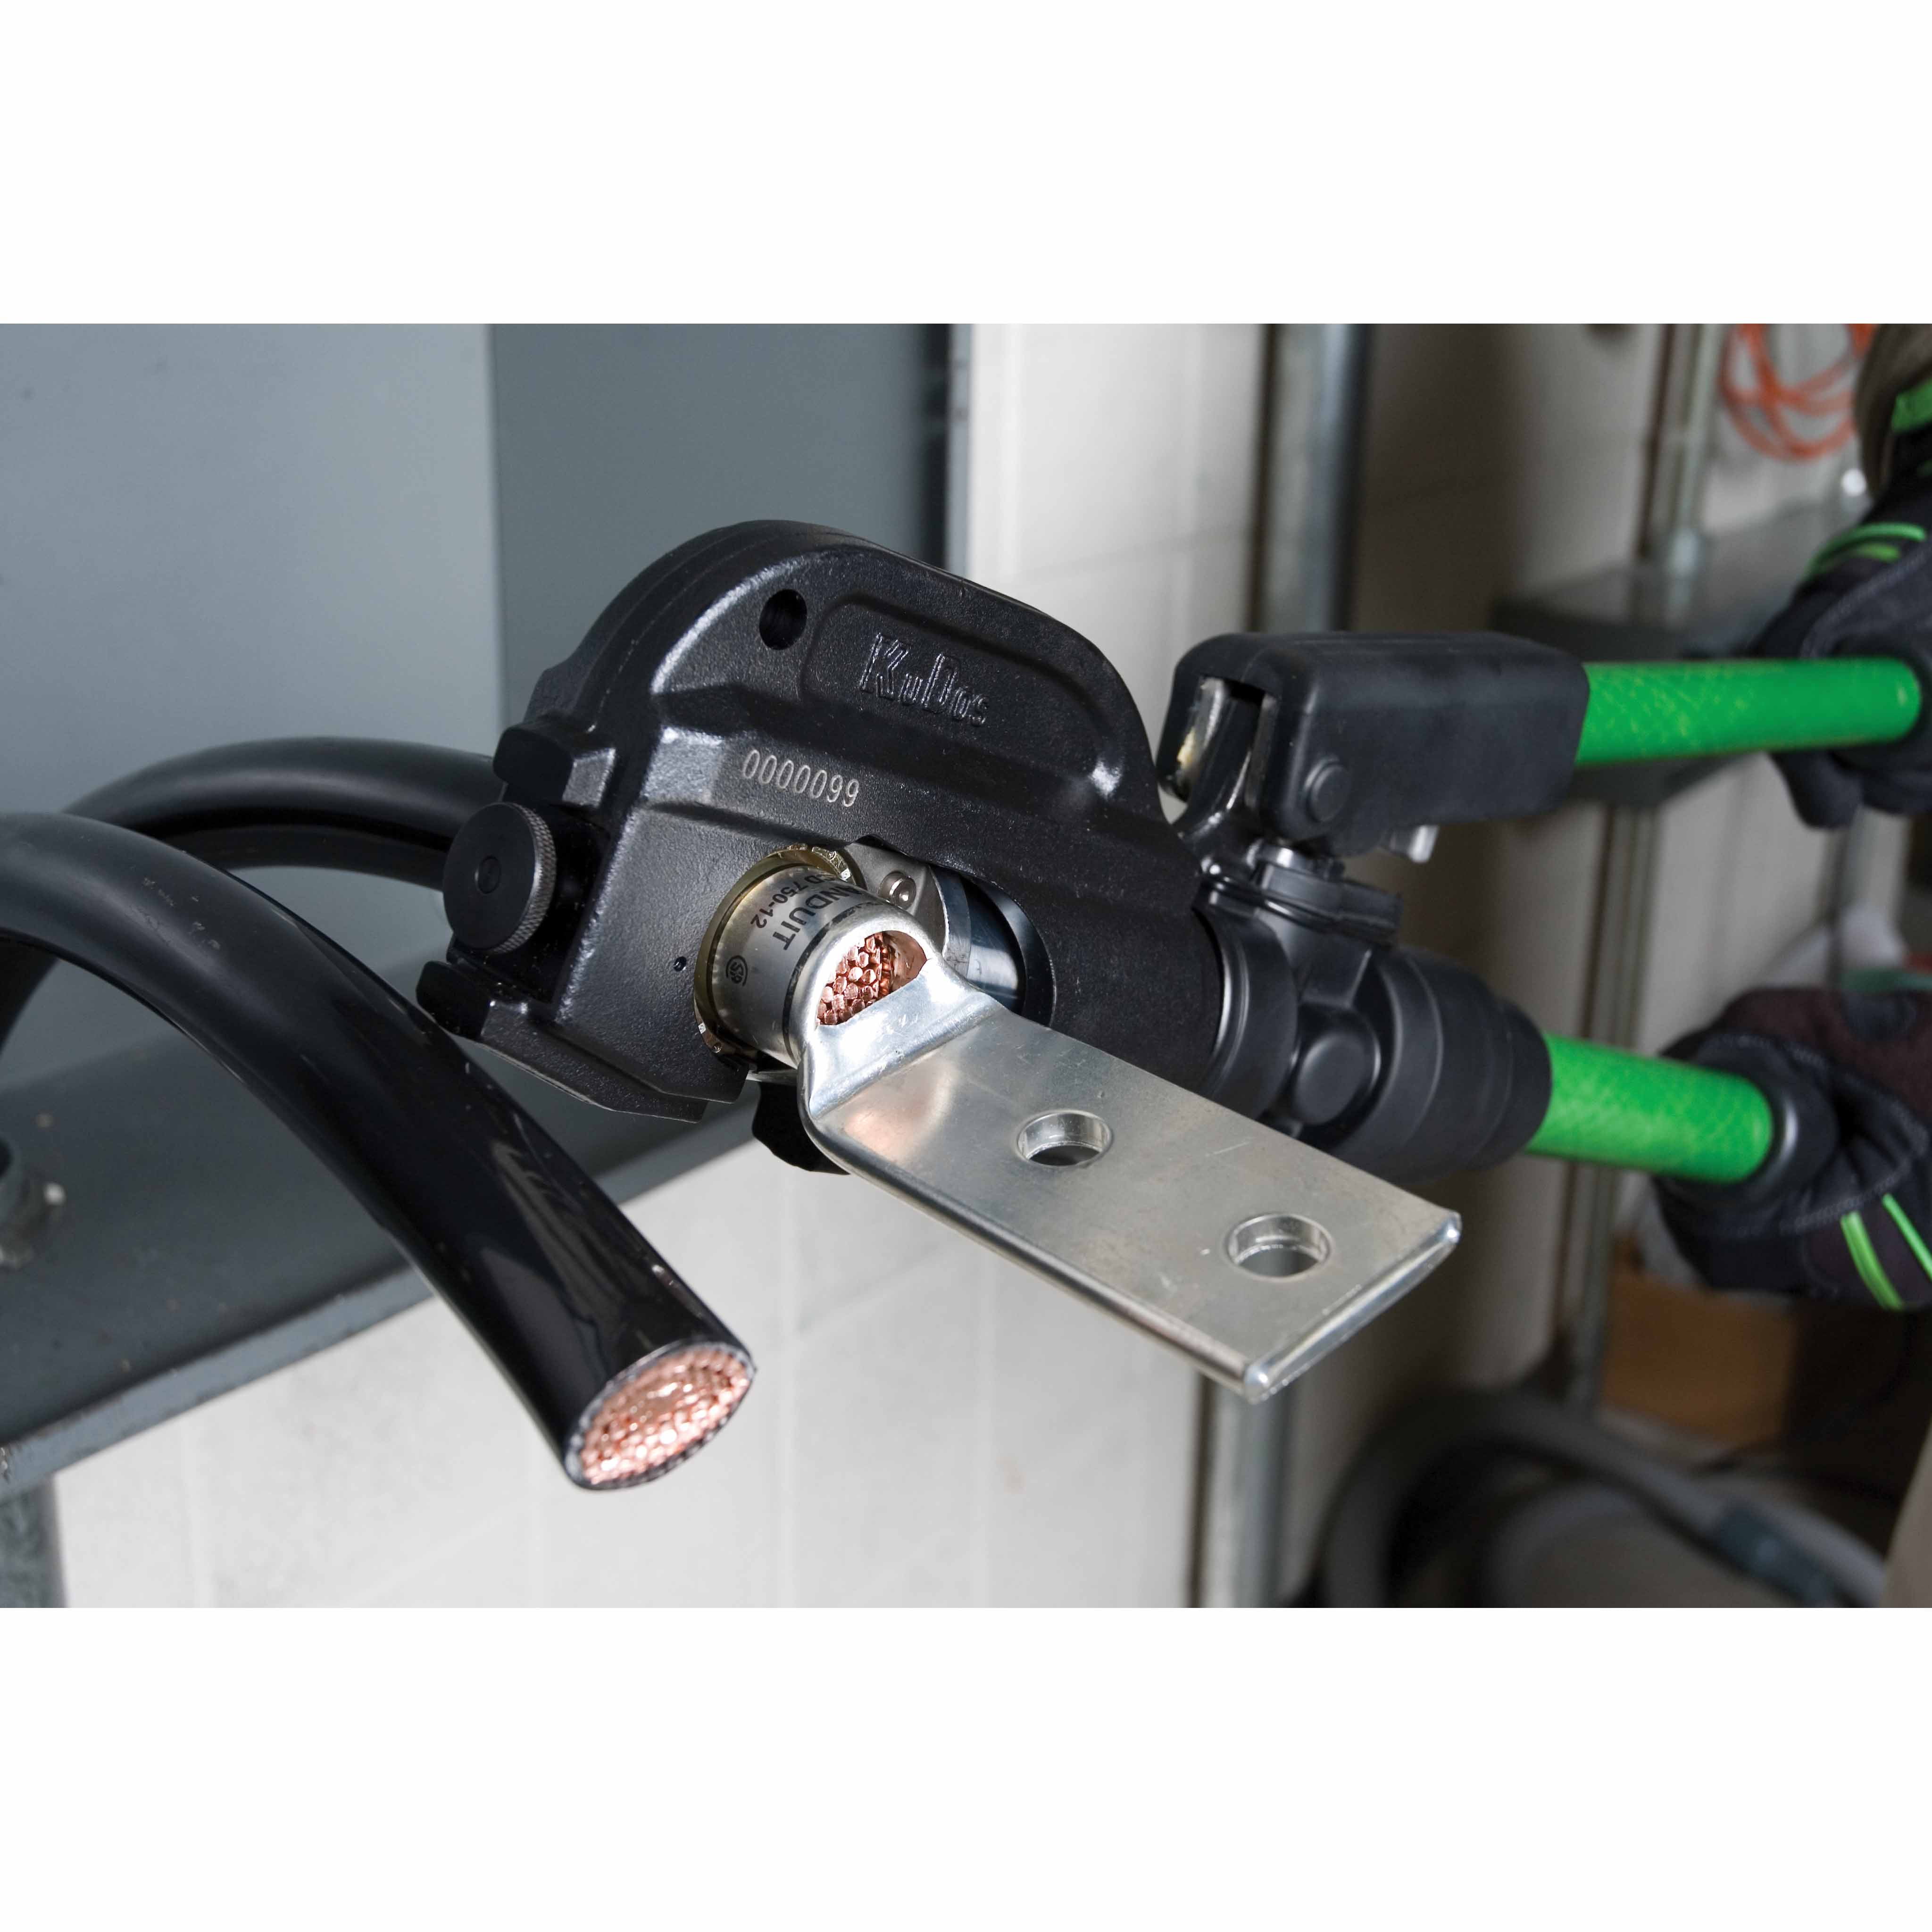 Greenlee HKL1232 12-ton Manual Hydraulic Crimping Tool for sale online 